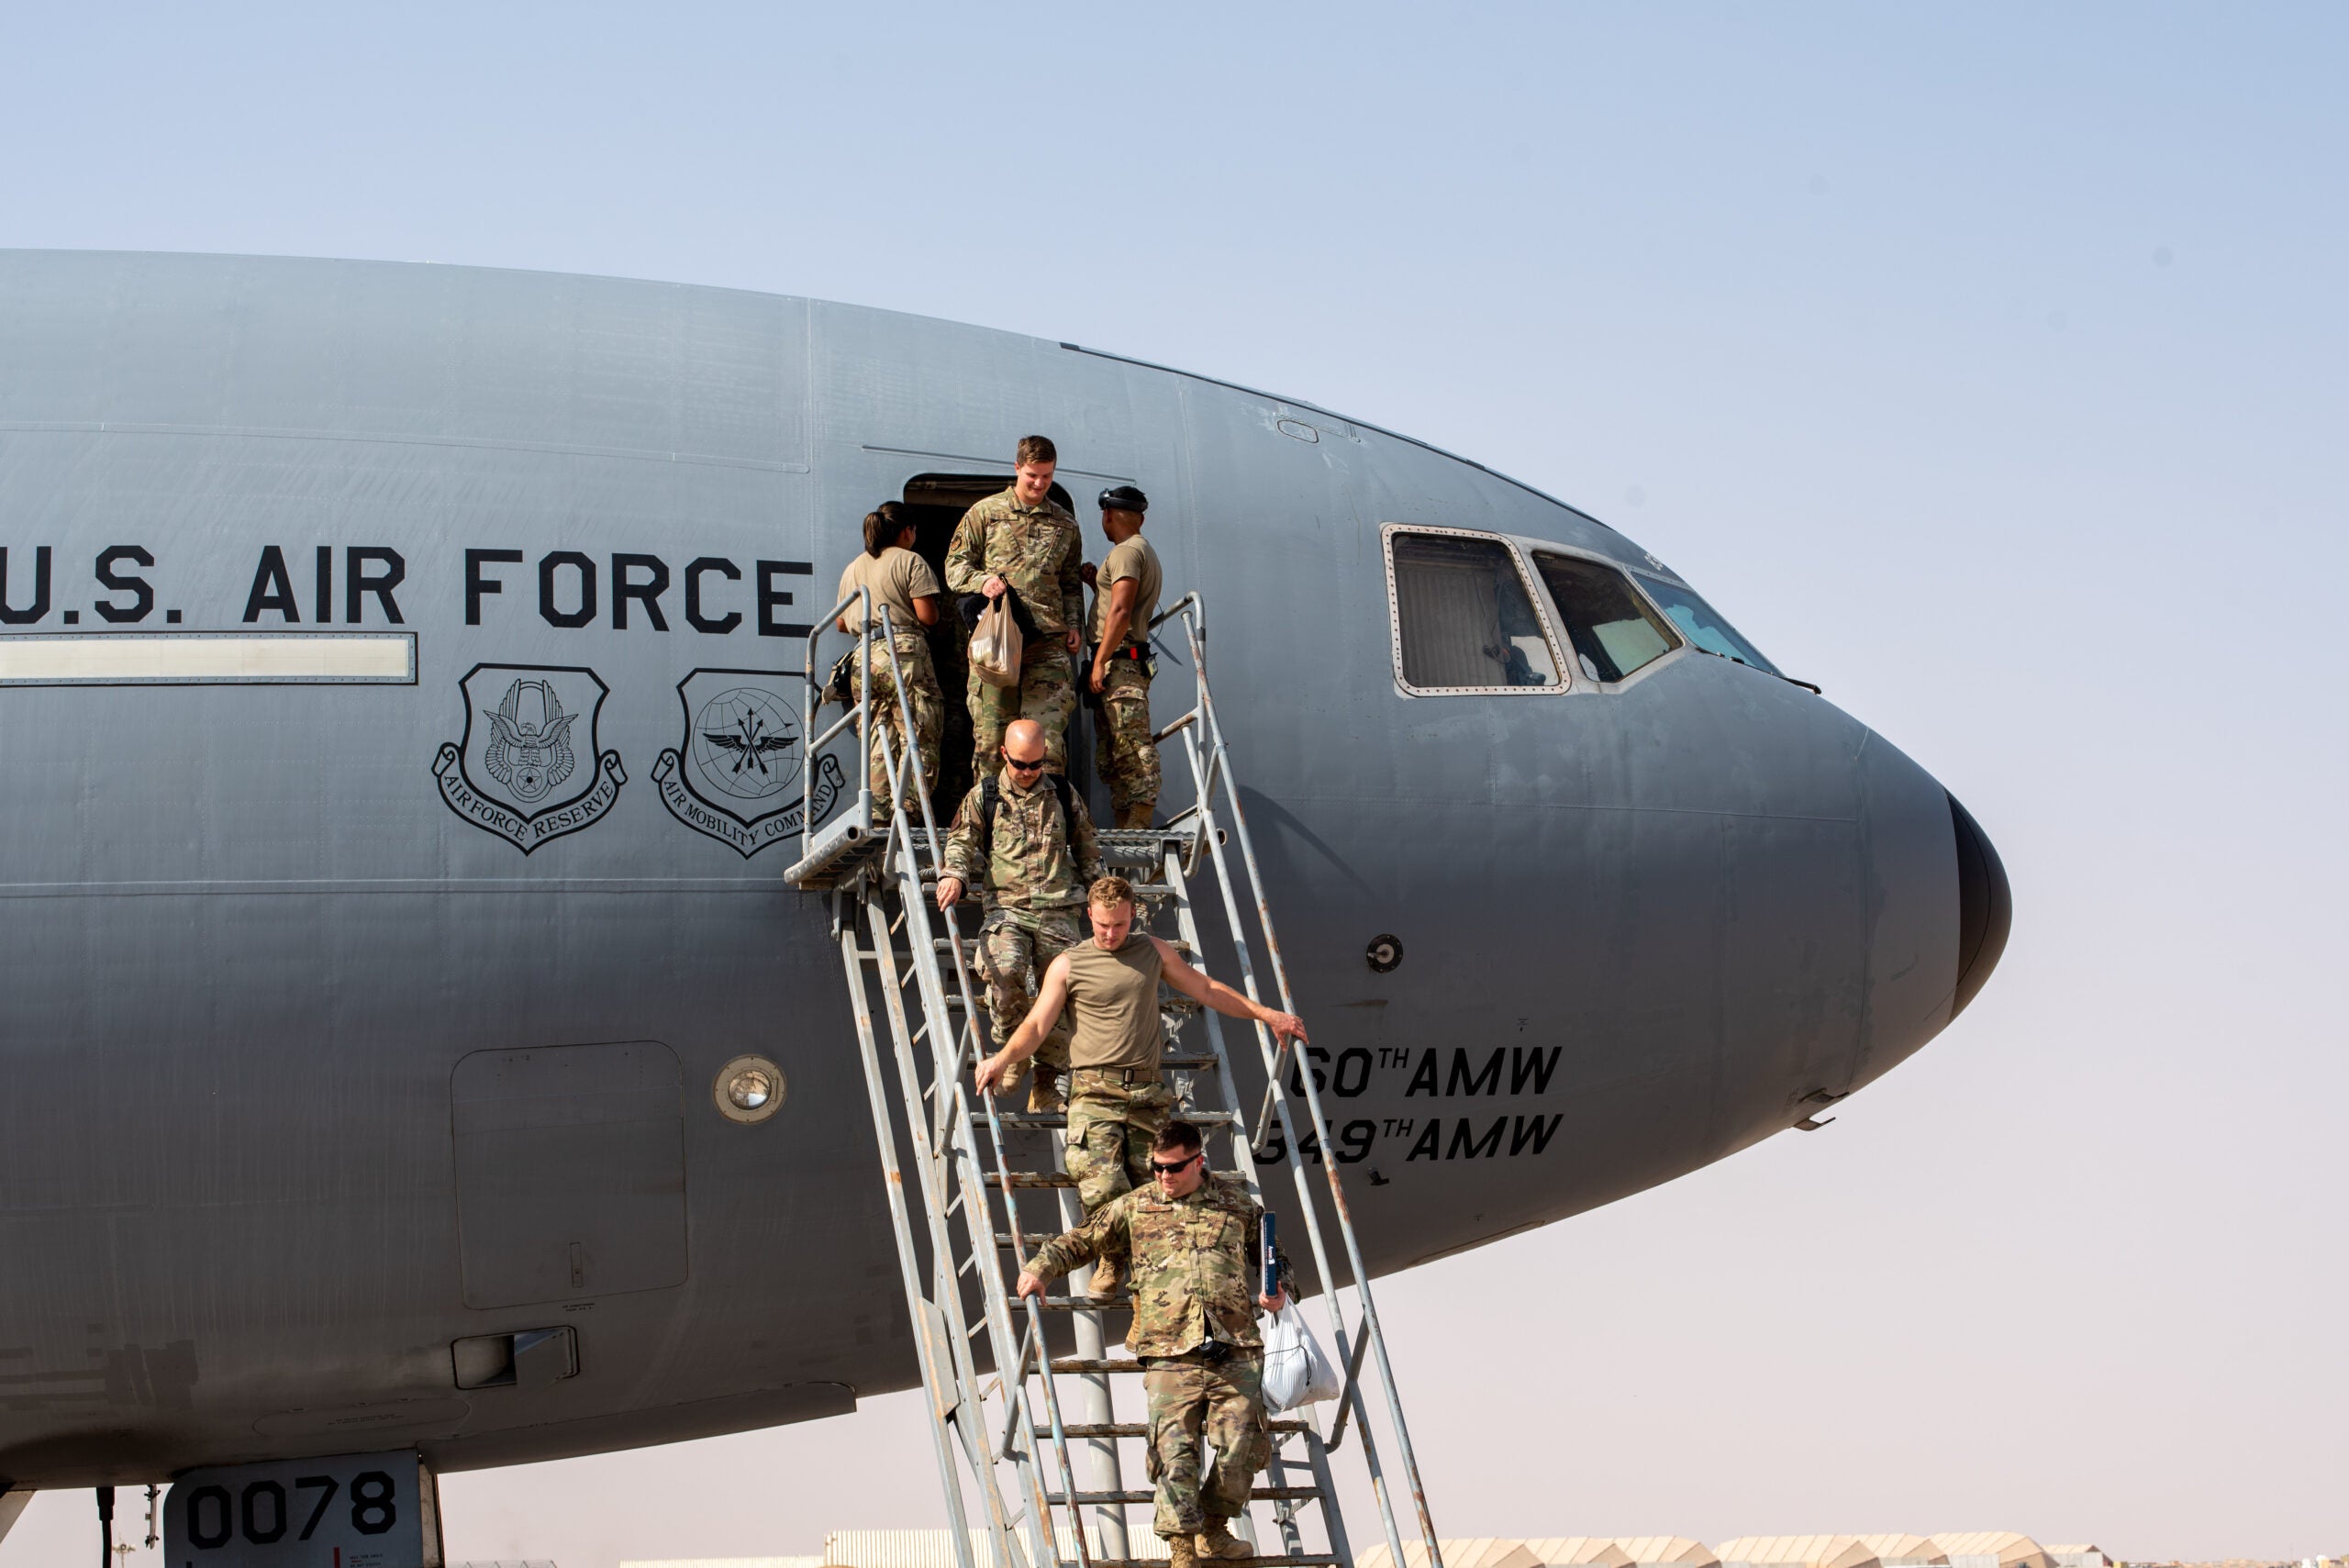 U.S. Airmen from the 908th Air Refueling Squadron exit a KC-10  Extender after the aircraft returned from the airframe's final combat sortie on Prince Sultan Air Base, Oct. 3, 2023. The flight served as a capstone for the KC-10 after over 30 years of service within the U.S. Air Forces Central (AFCENT) Area of Responsibility. By September 2024, the U.S. Air Force's fleet of KC-10s will be decommissioned and gradually replaced by the KC-46 aircraft. (U.S. Air Force photo by Tech. Sgt. Alexander Frank)